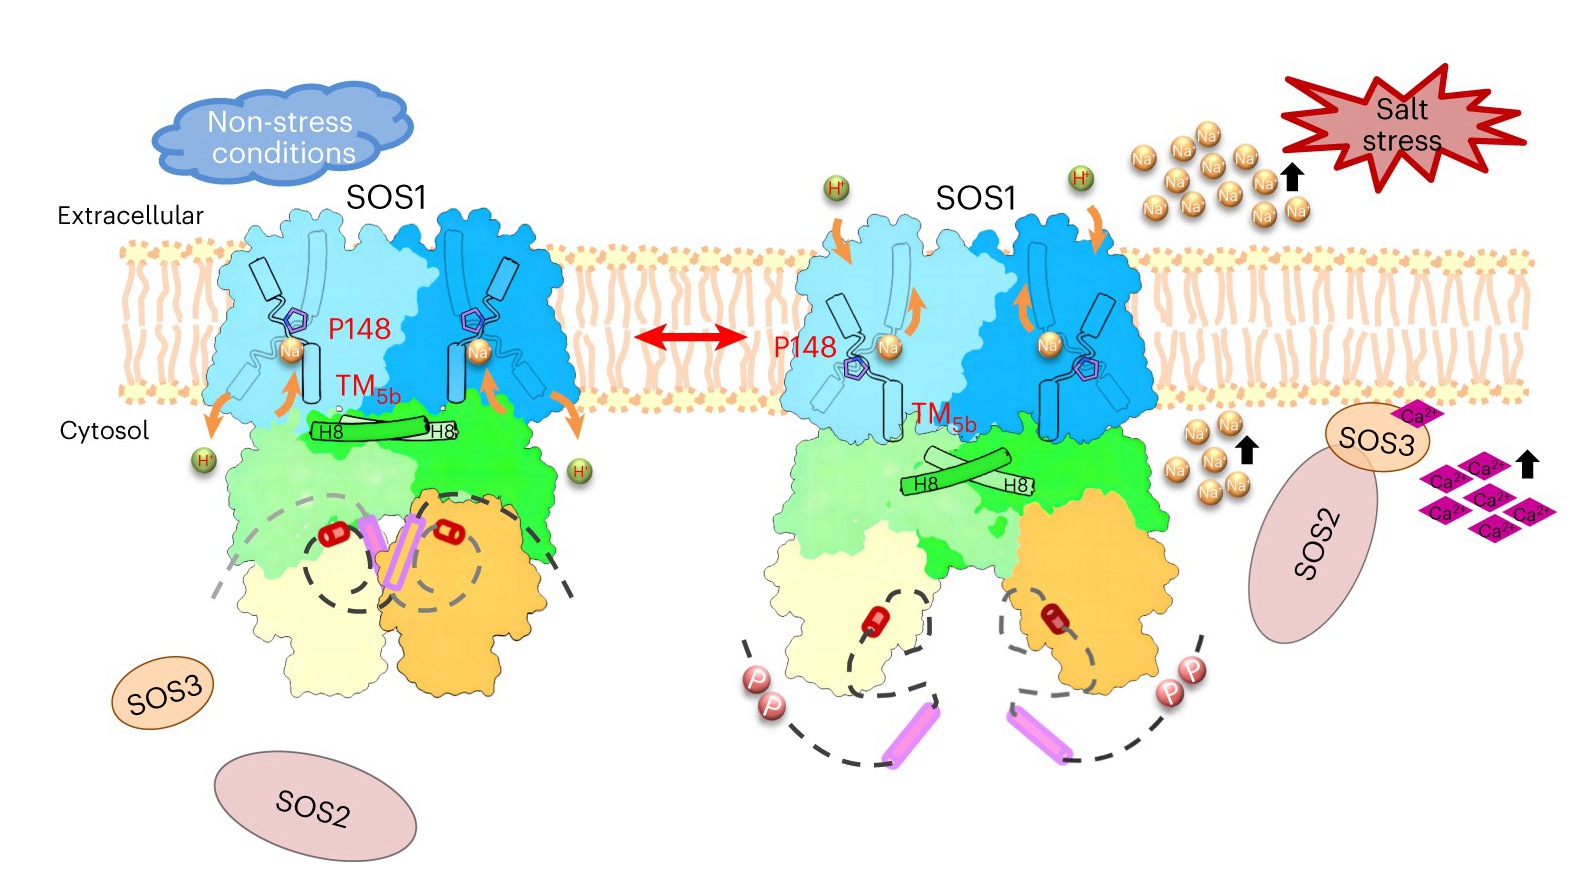 Seeing how SOS1 works in response to salt stress